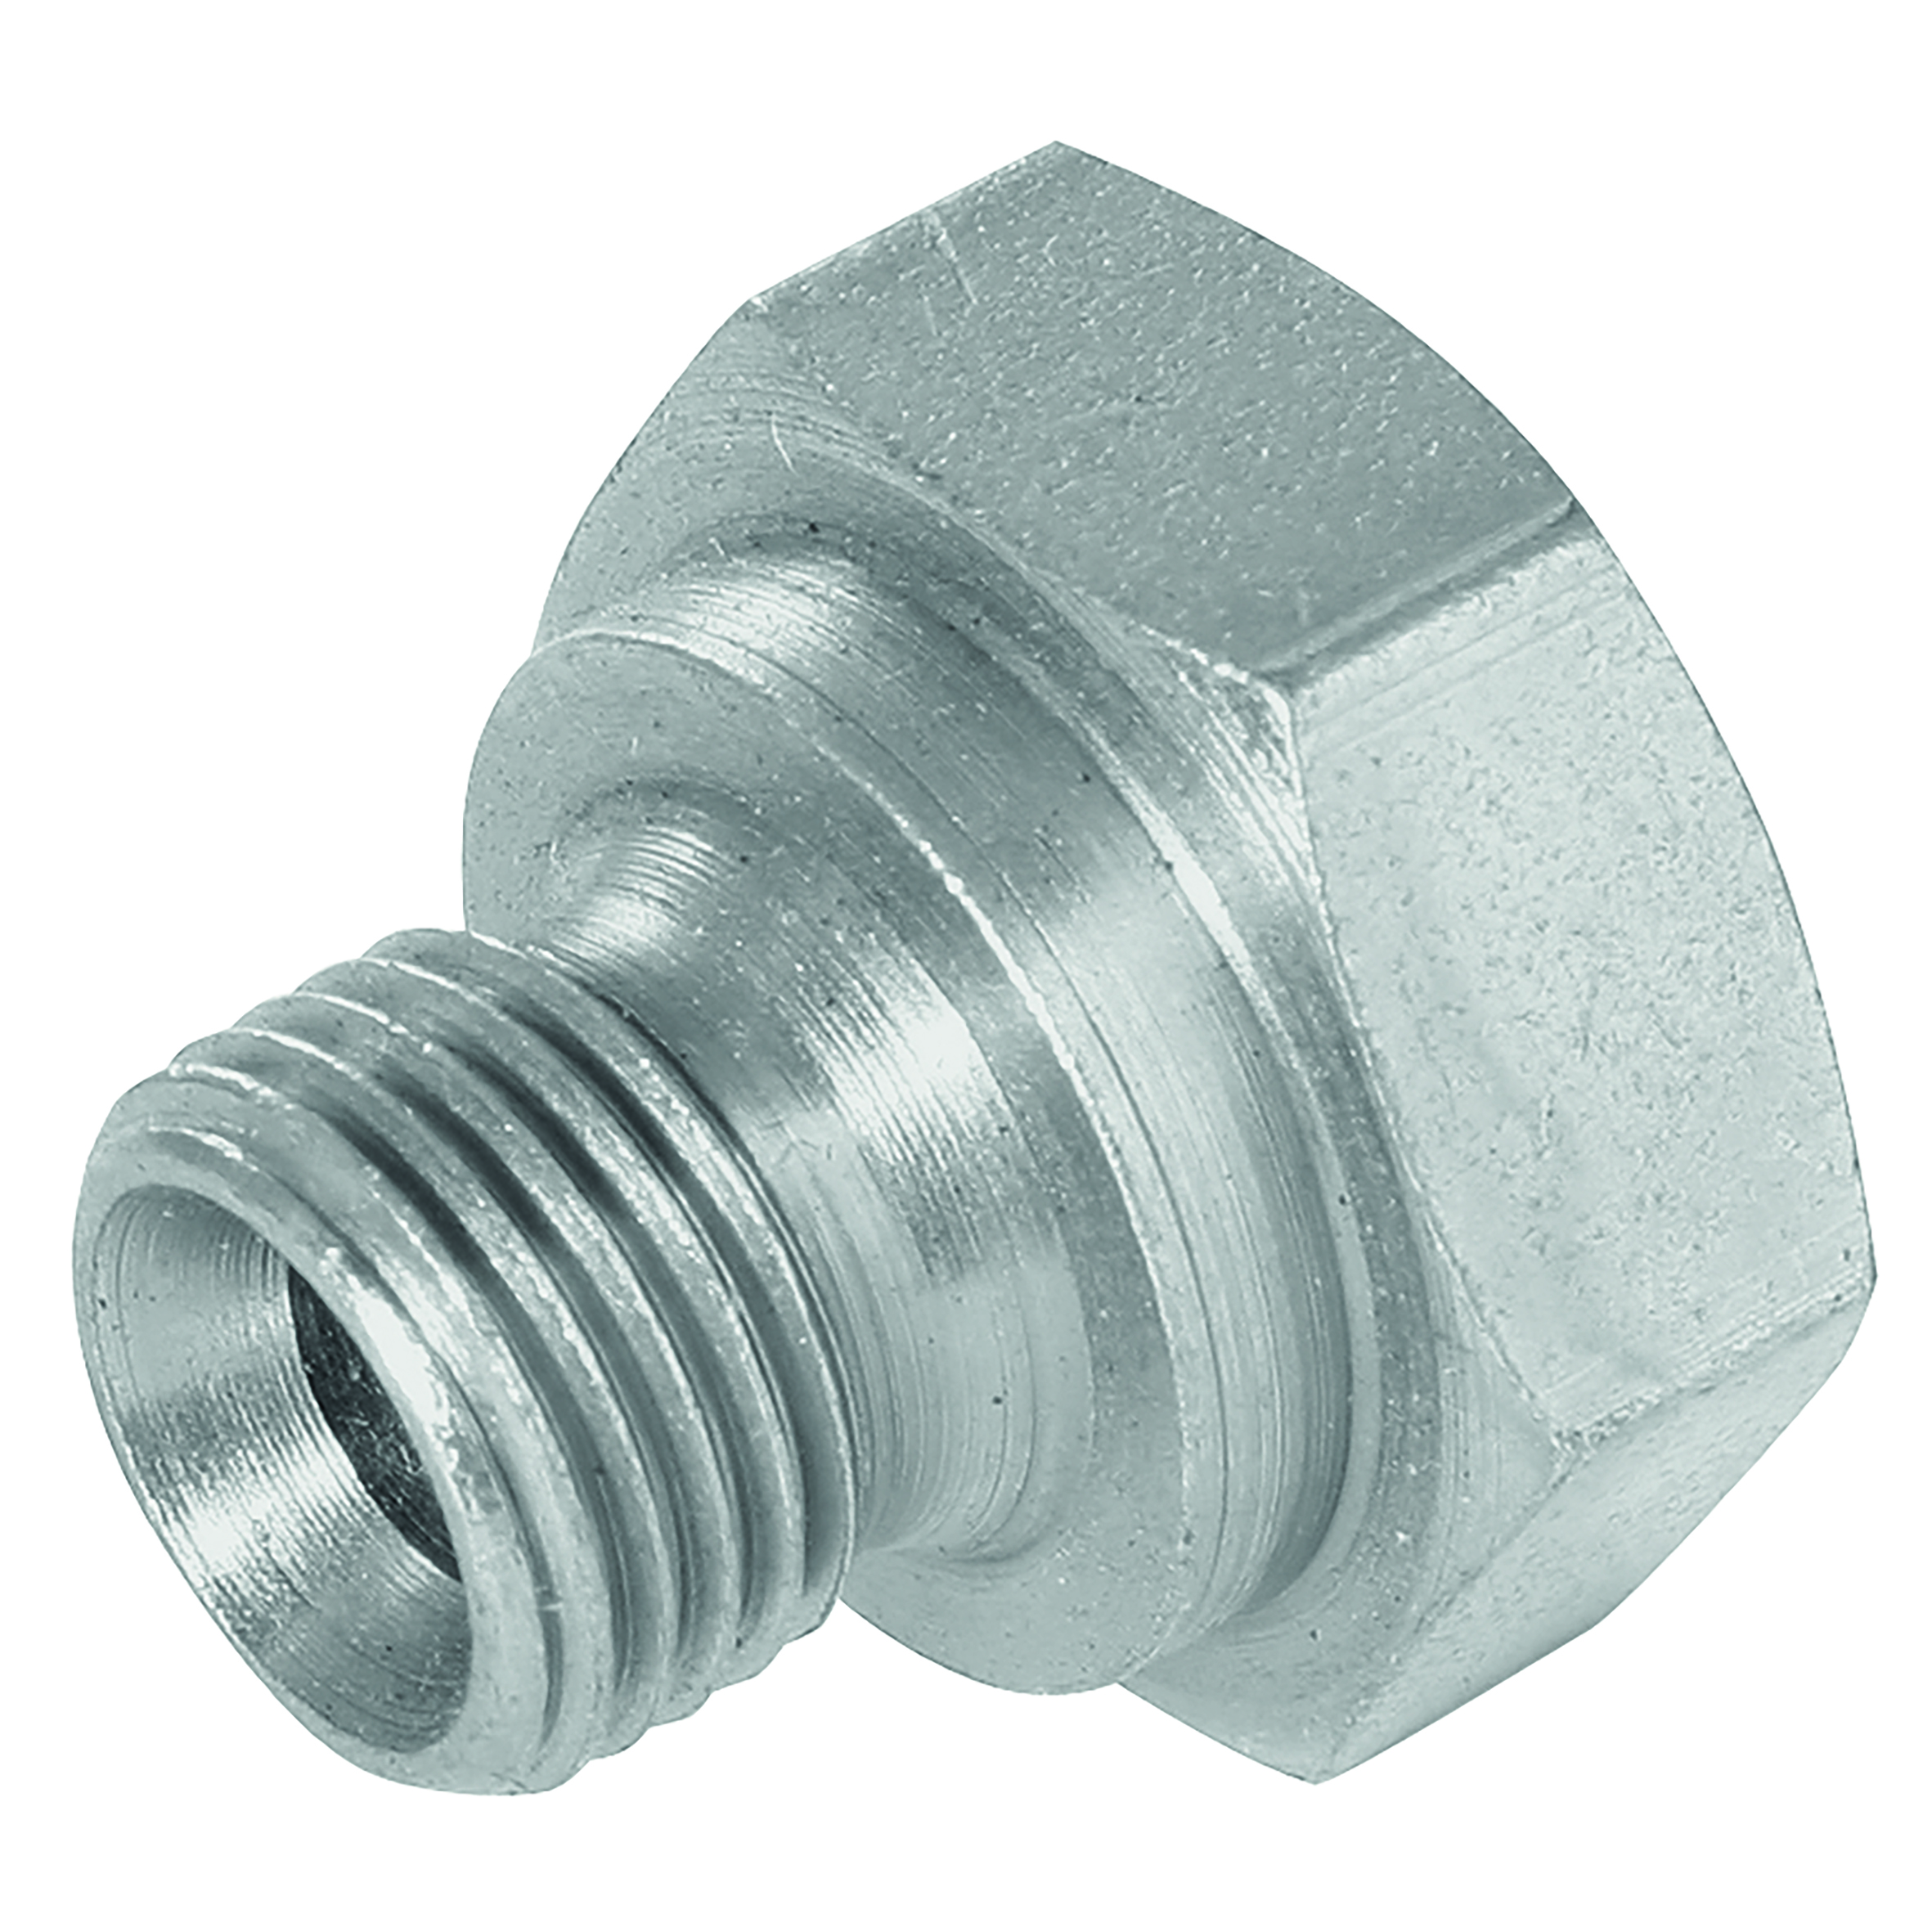 3/8" BSPP 60 CONED PLUG DIN 3852 FORM A